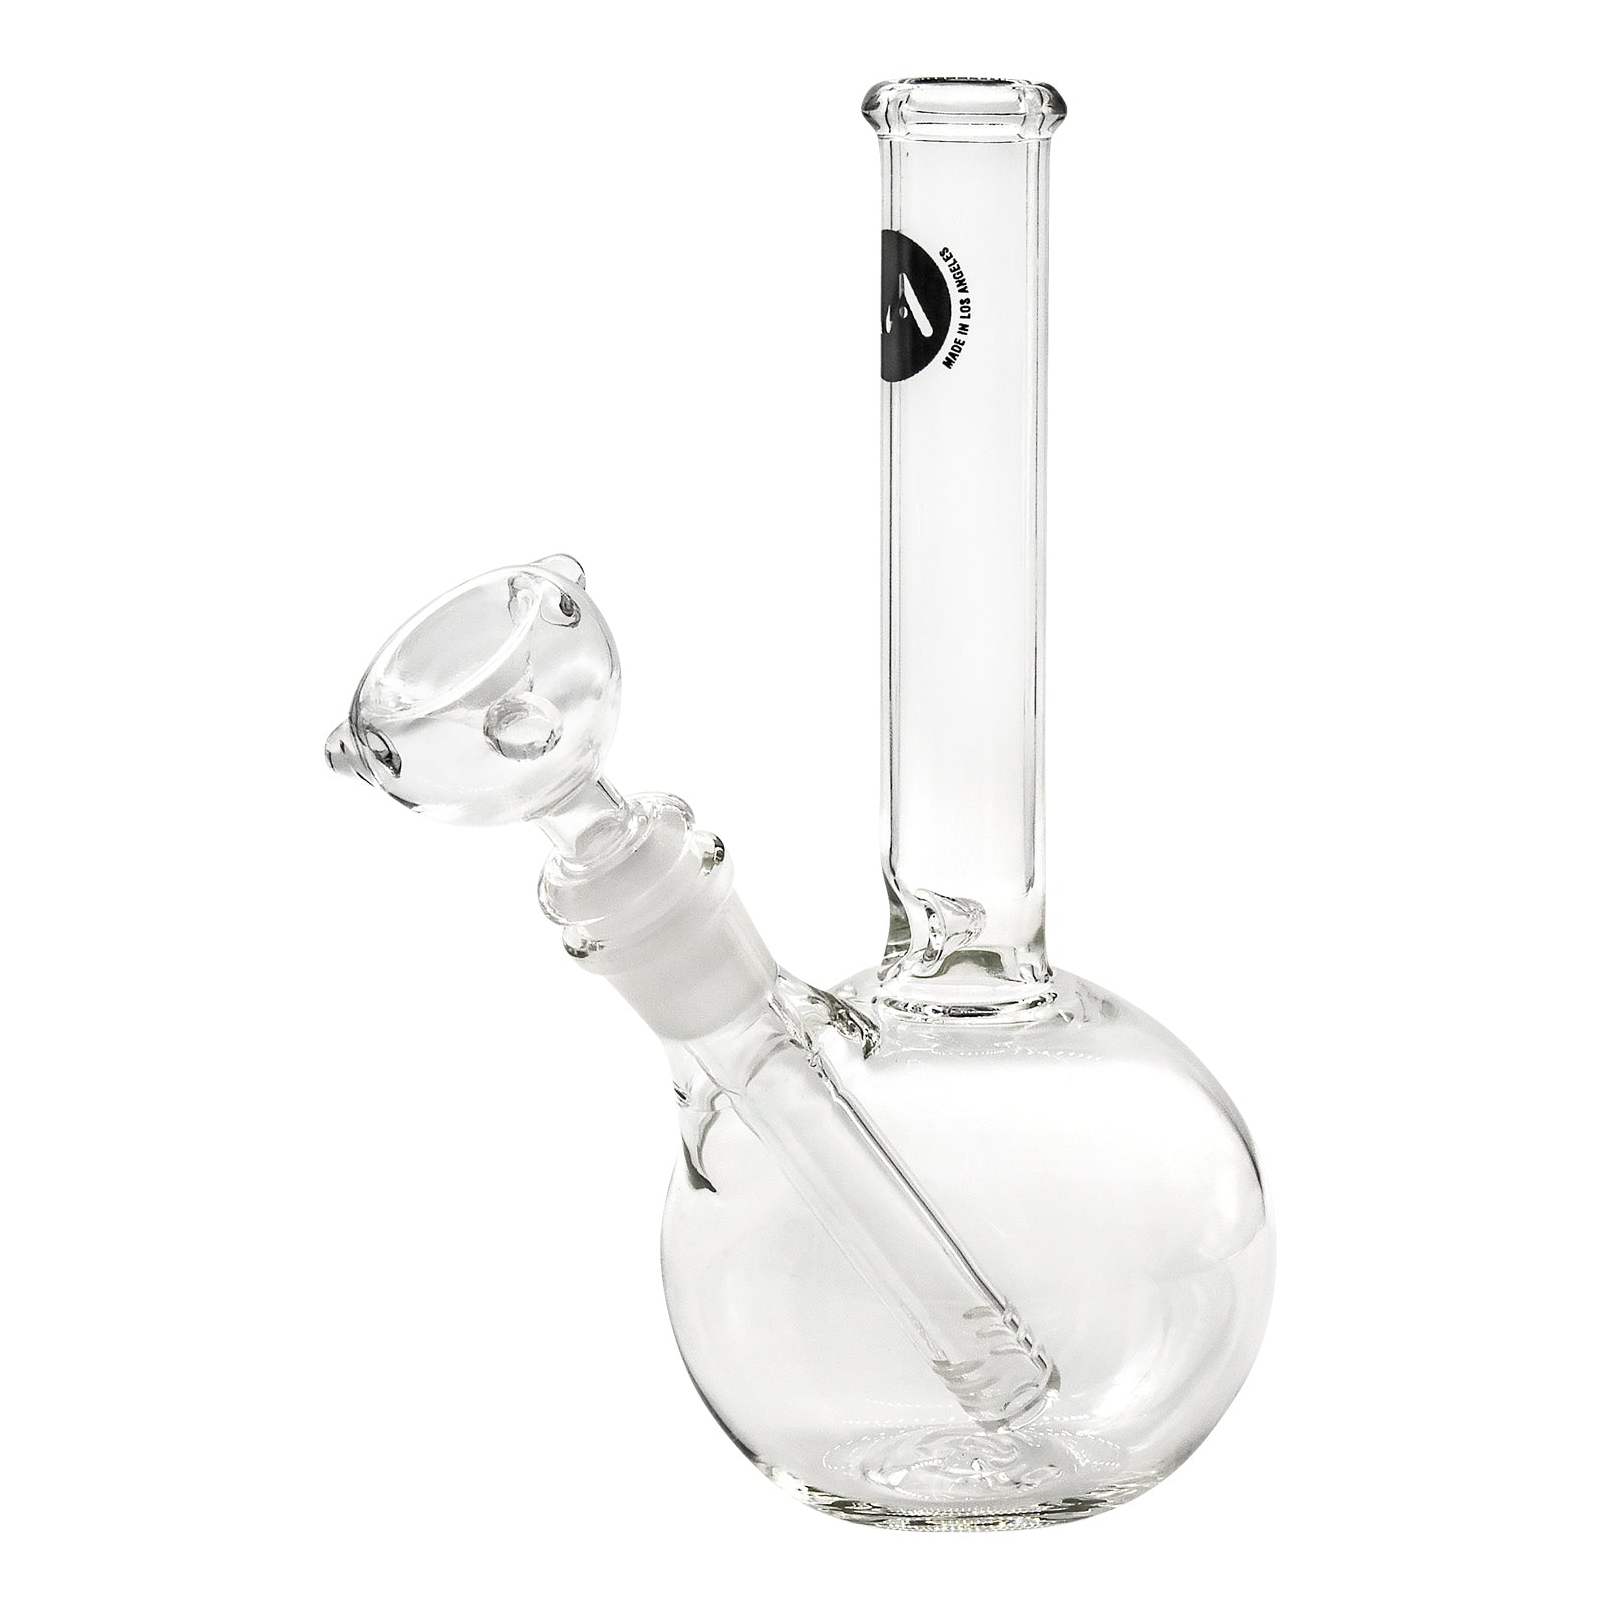 LA Pipes Clear Glass Bubble Bong - INAHLCO